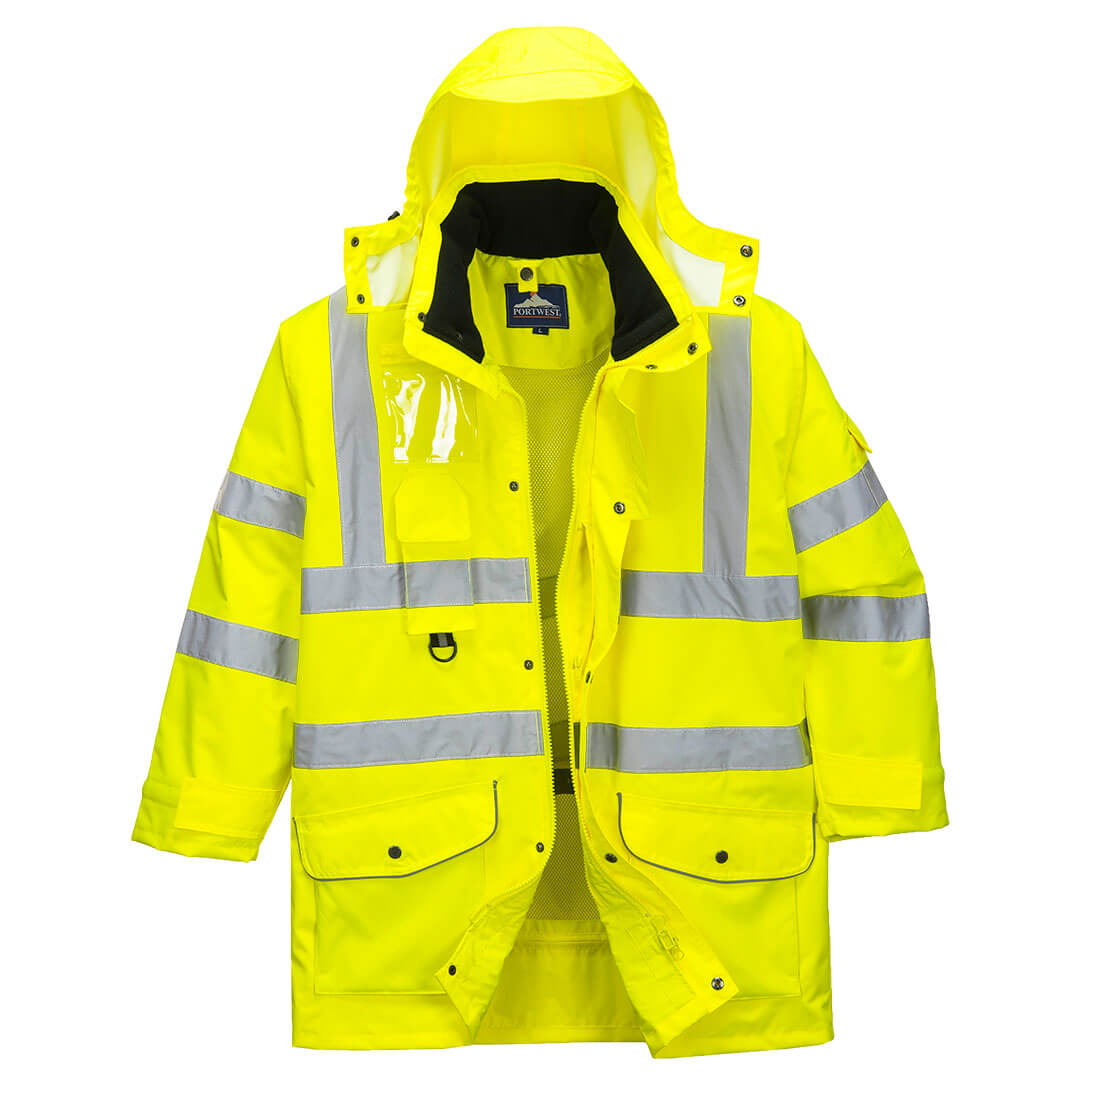 Image of Oxford Weave 300D Class 3 Hi Vis 7-in-1 Traffic Jacket Yellow 2XL